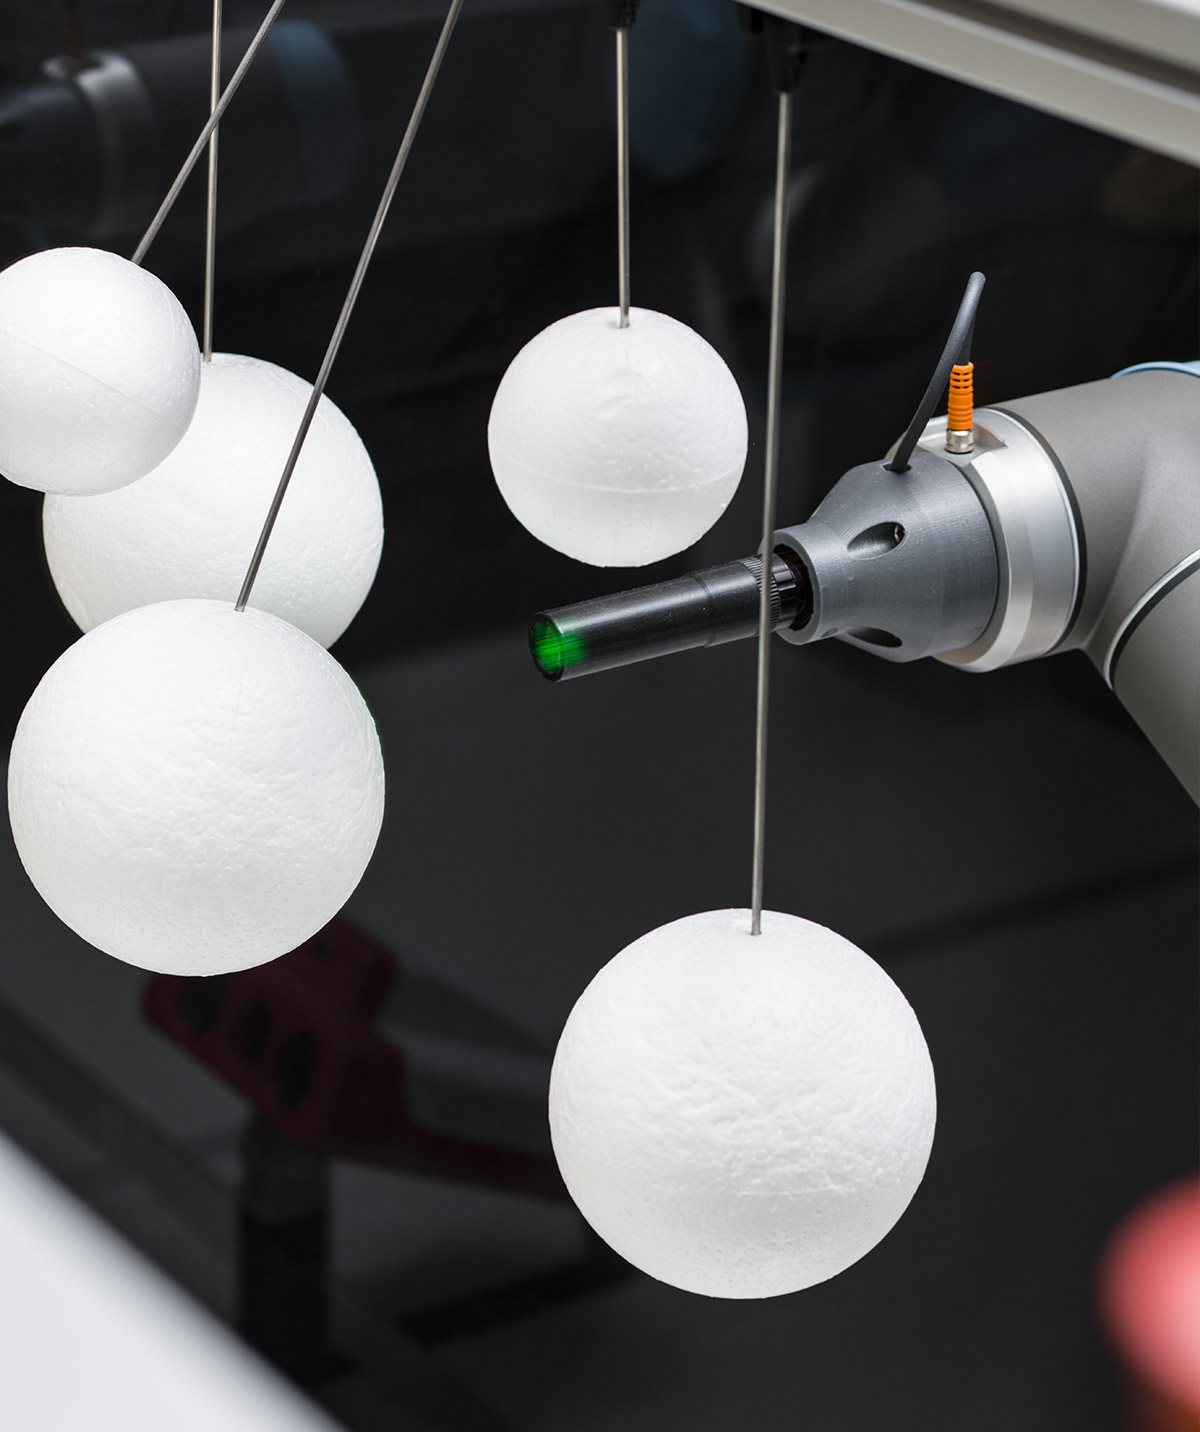 Experimental setup – The users task is to hit all balls with the robot arm. The movement instructions are entered via 3D touchpad.